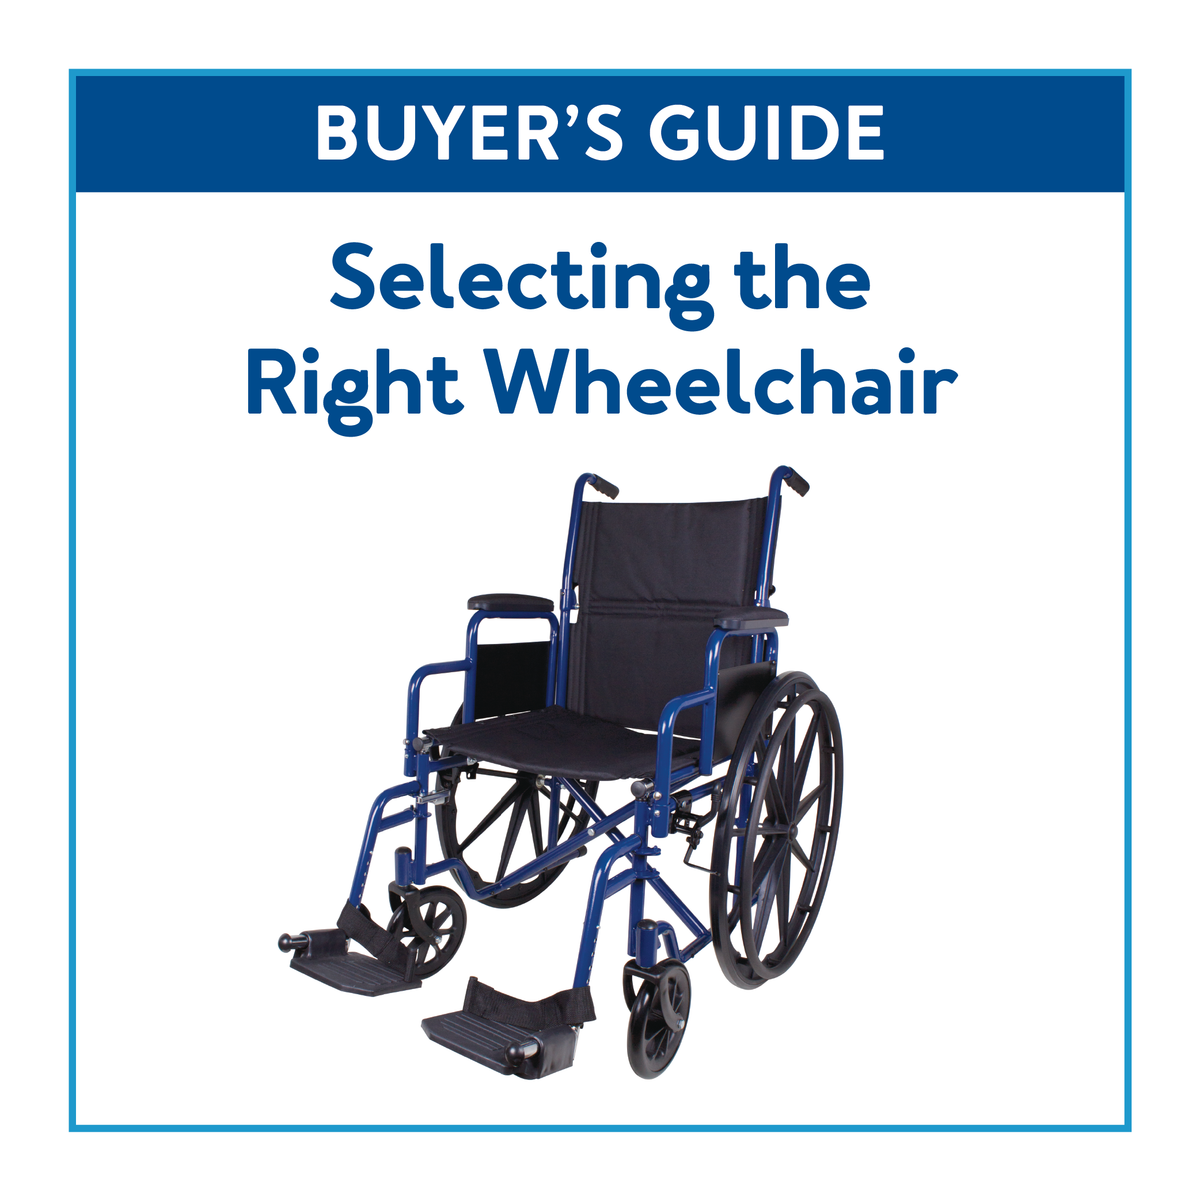 A ProBasics transport chair surrounded by a blue border with text “Buyer’s guide: Selecting the Right Transport Chair”